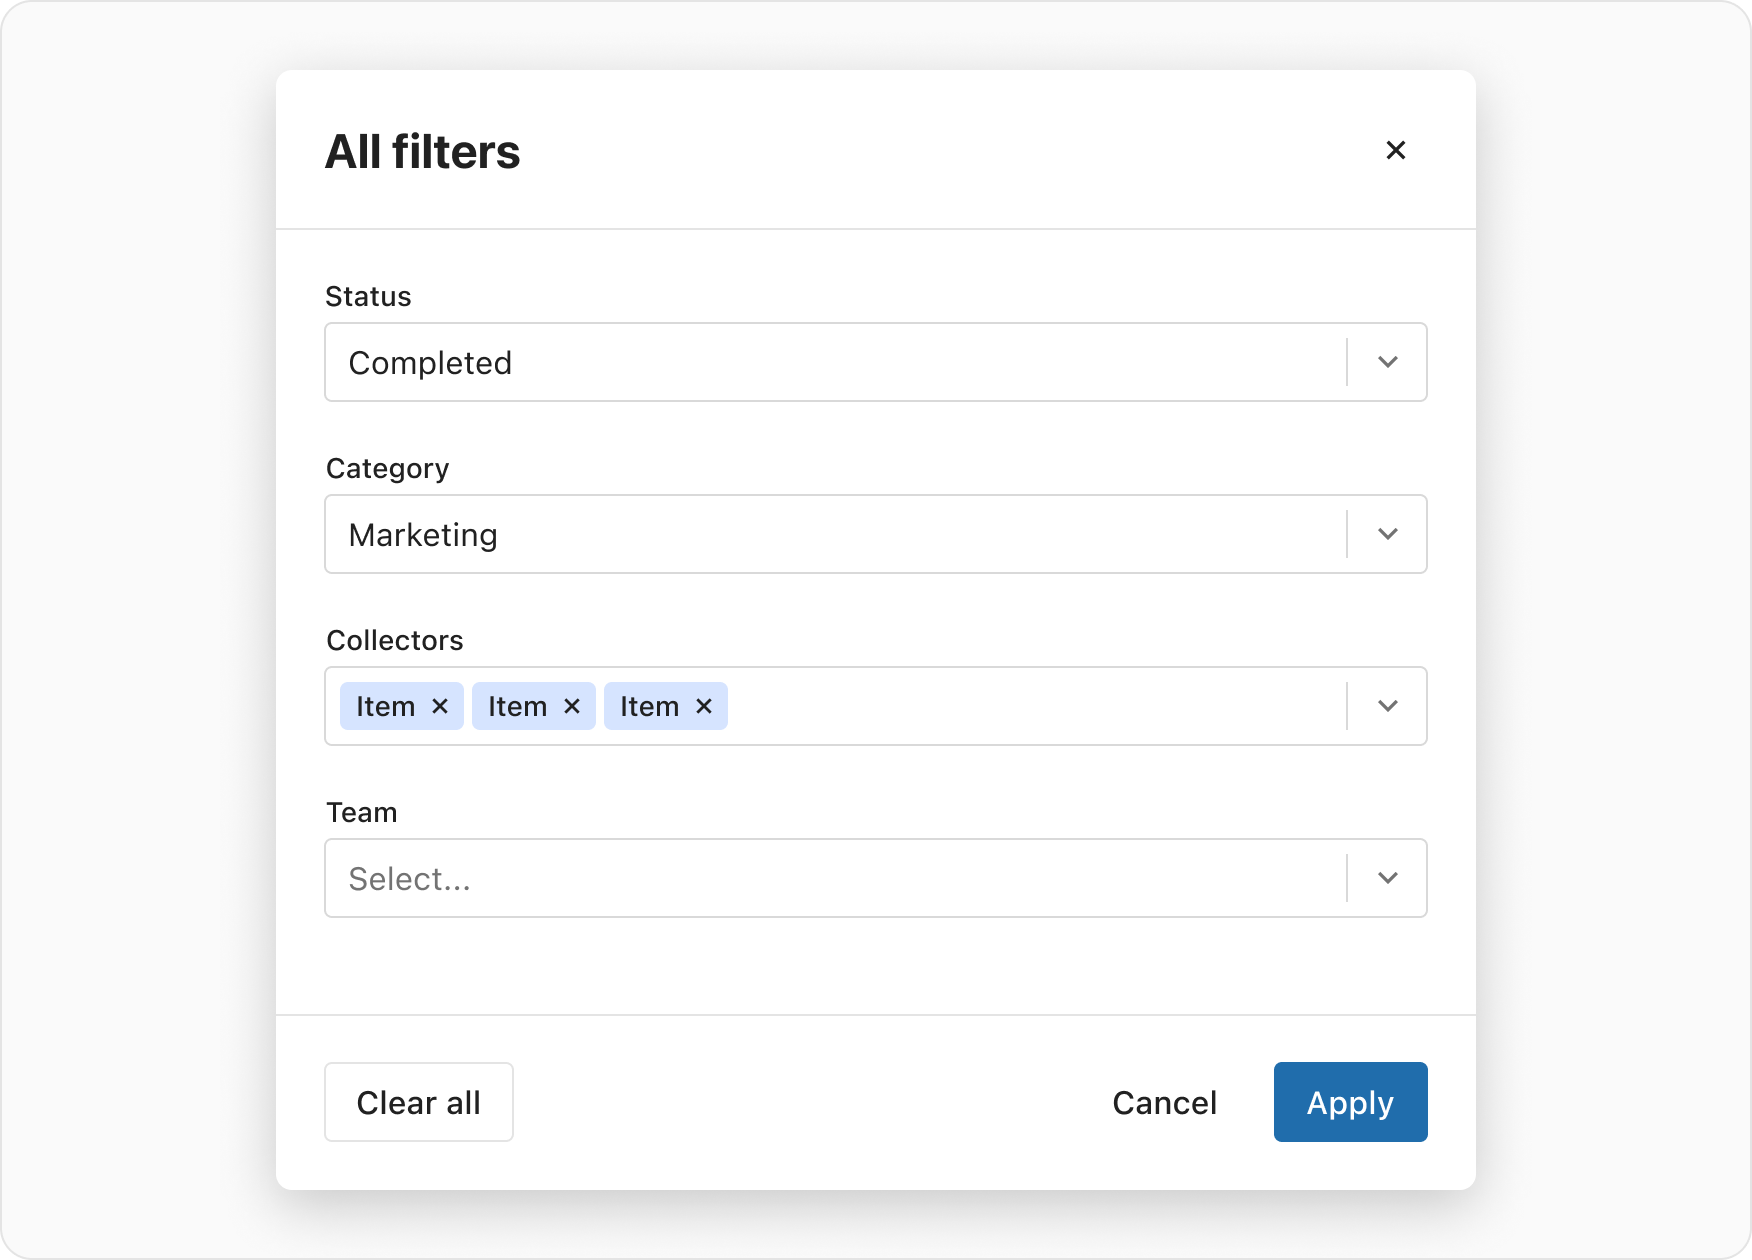 A UI example showing the all filters modal